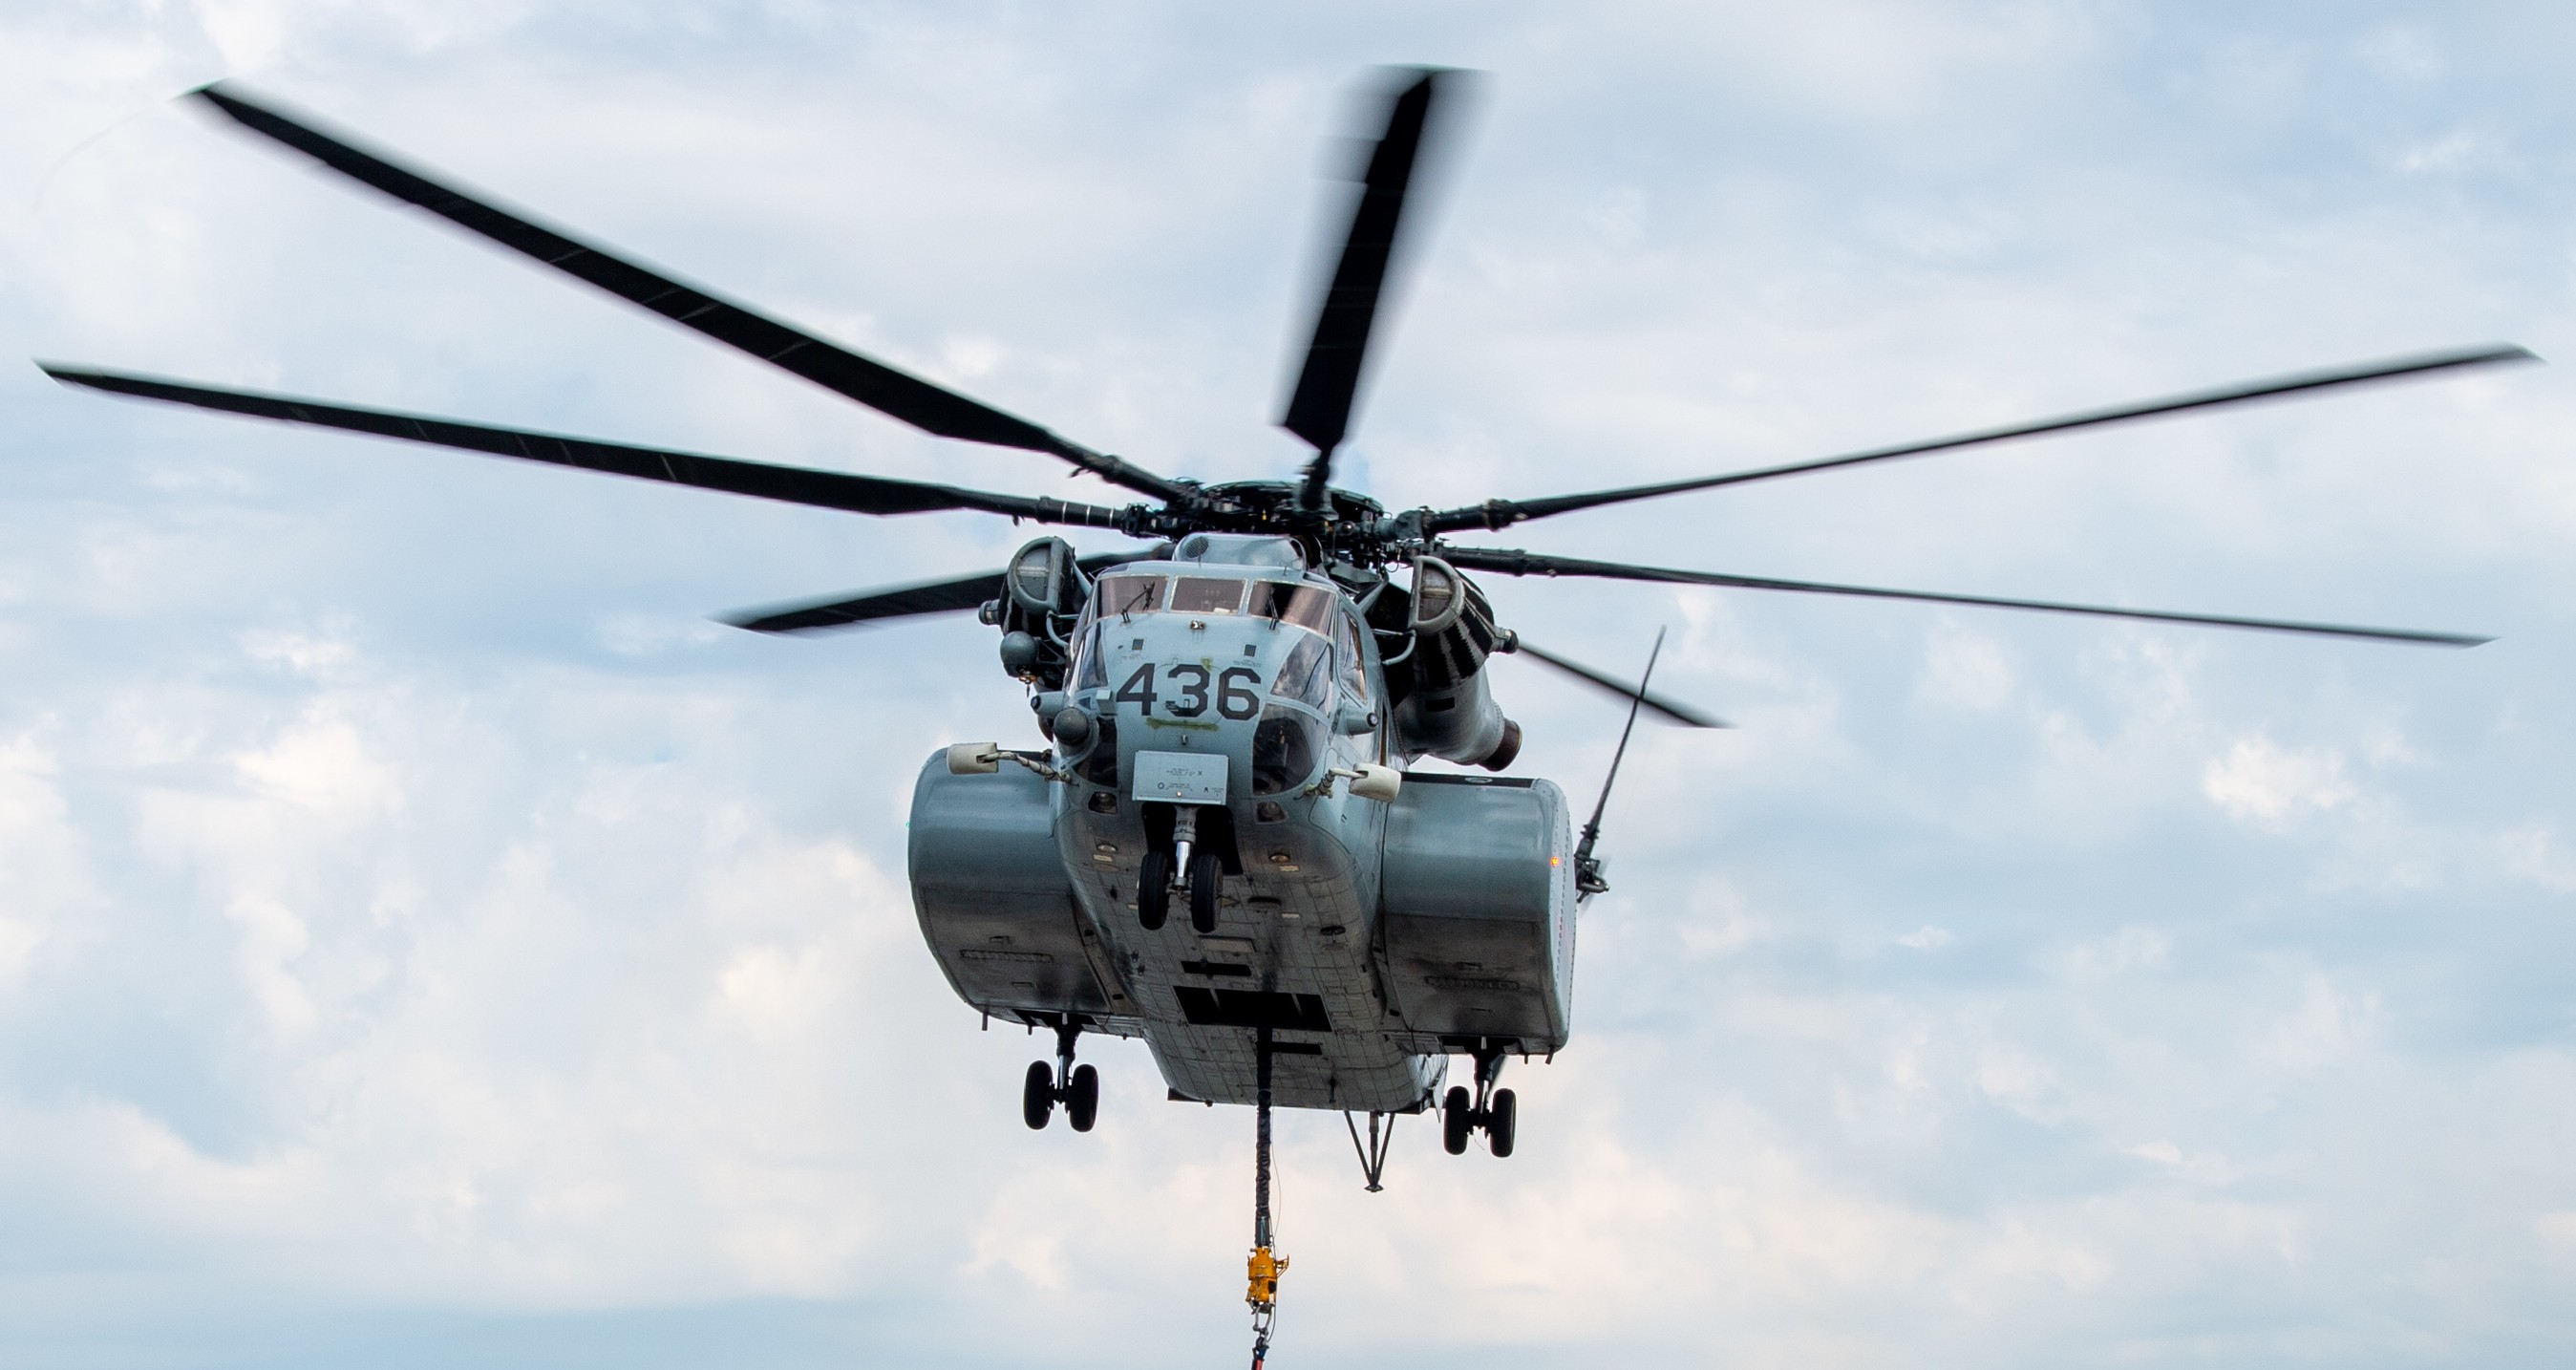 hm-12 sea dragons helicopter mine countermeasures squadron navy mh-53d 44